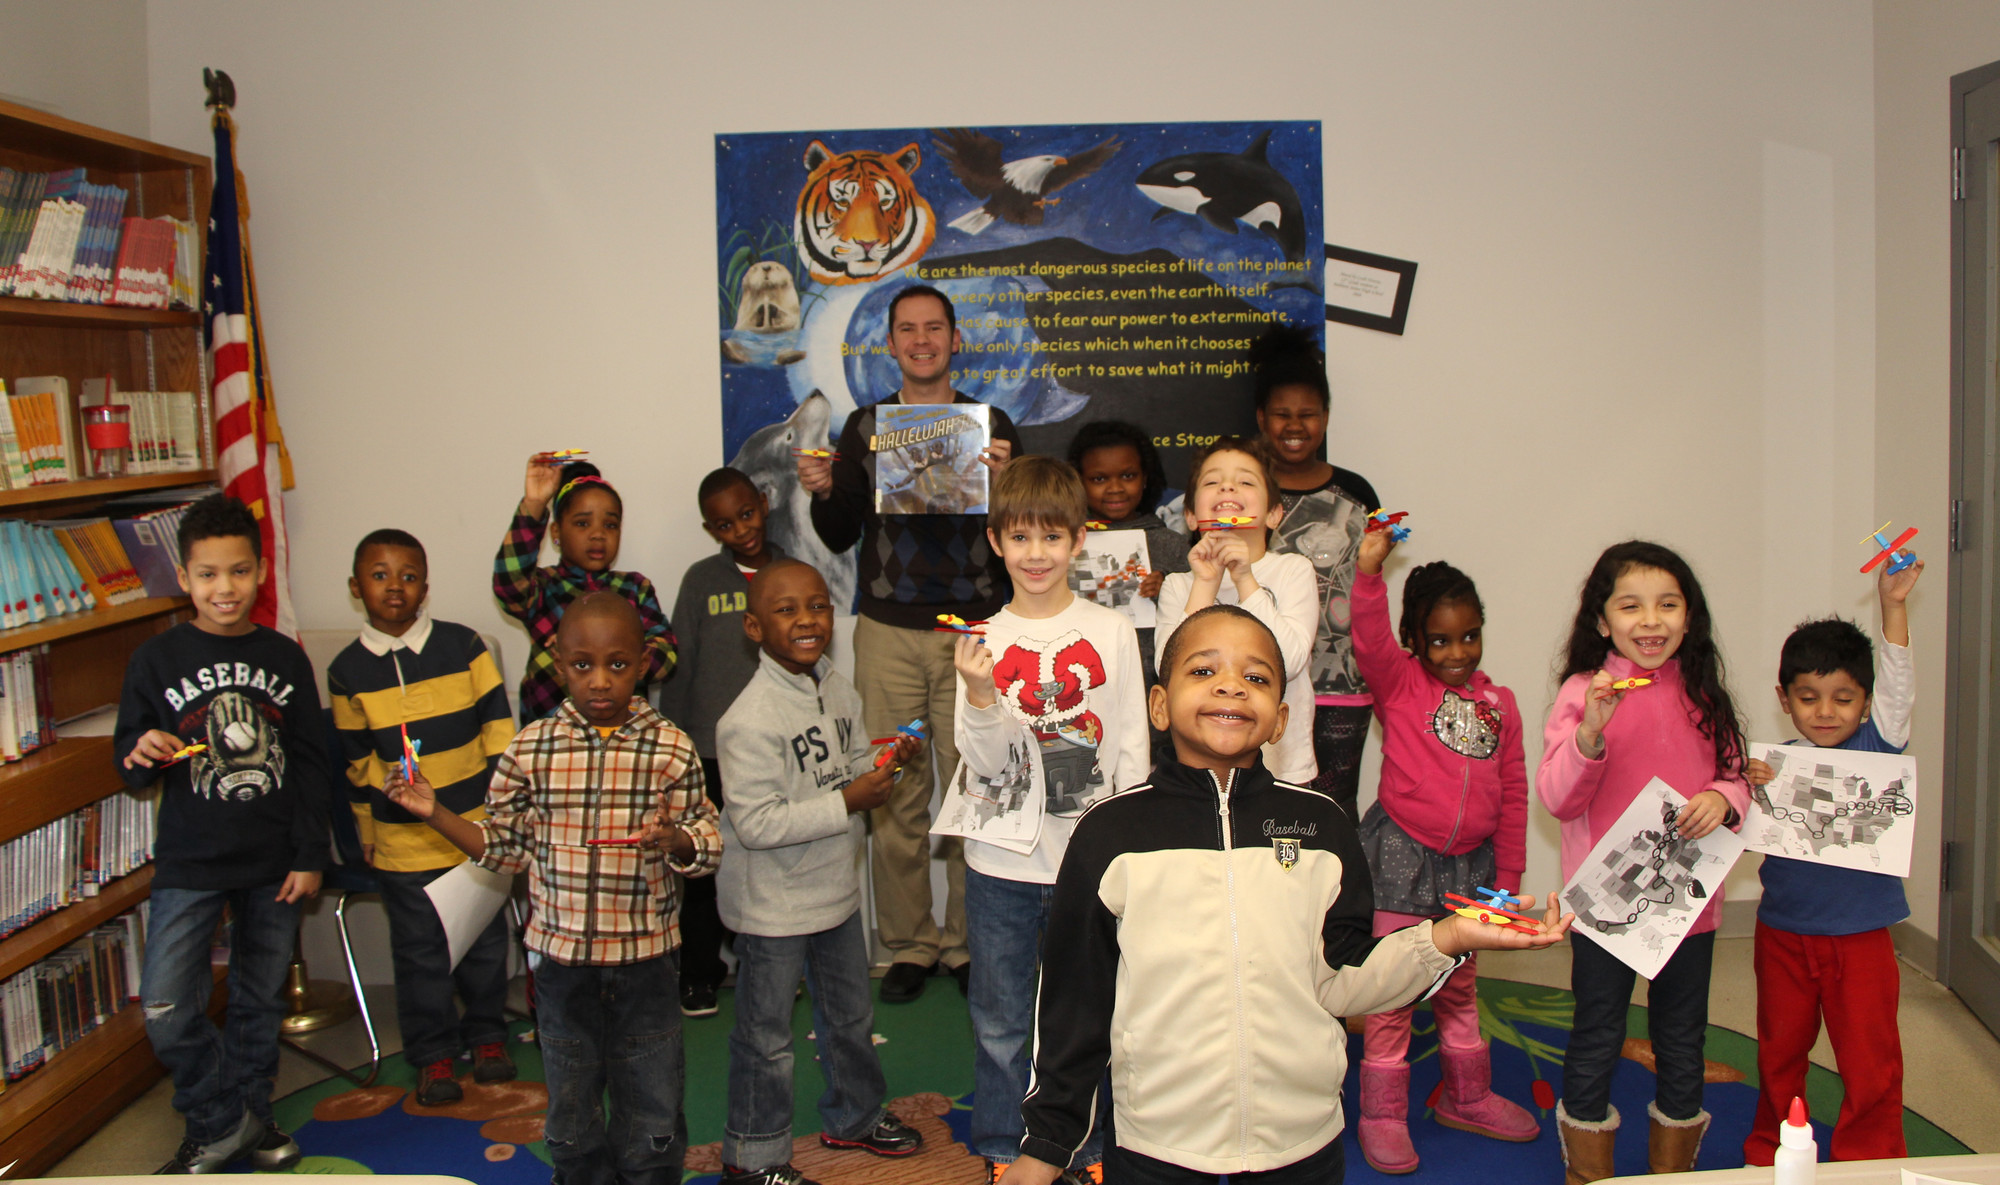 Children listened to a story and built a craft in honor of Black History Month on Feb. 20 at Baldwin Public Library.